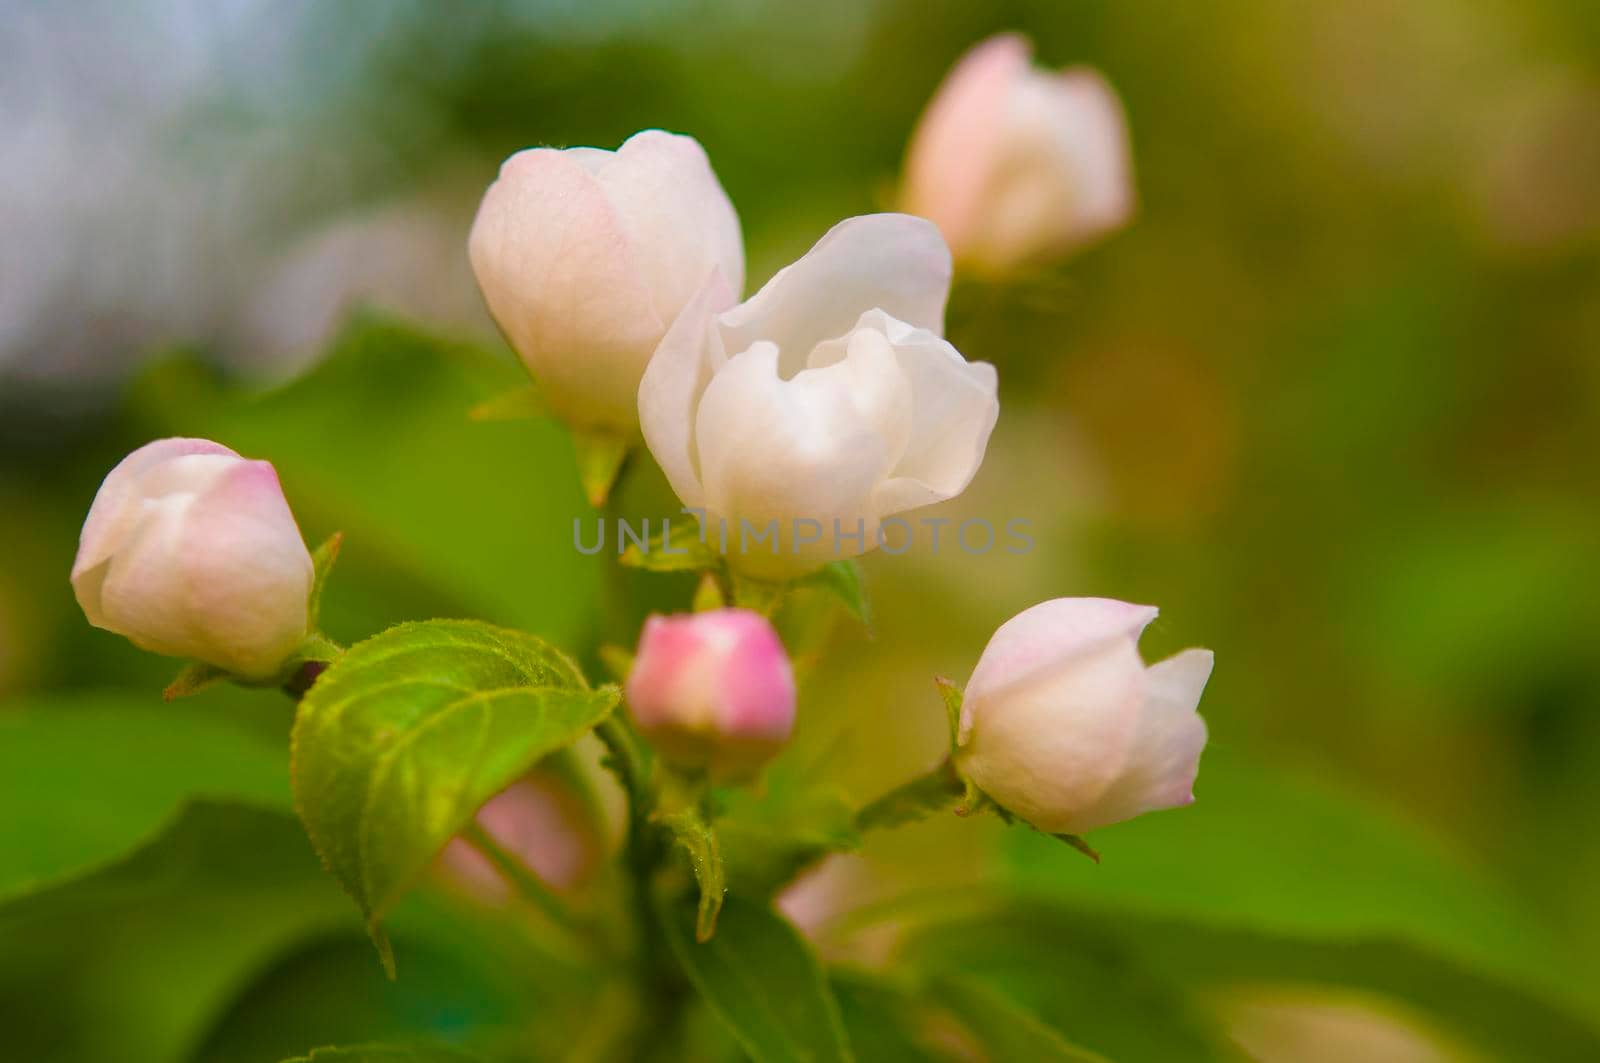 branch of apple tree with white flowers on a background of flowering trees. Copy space for text